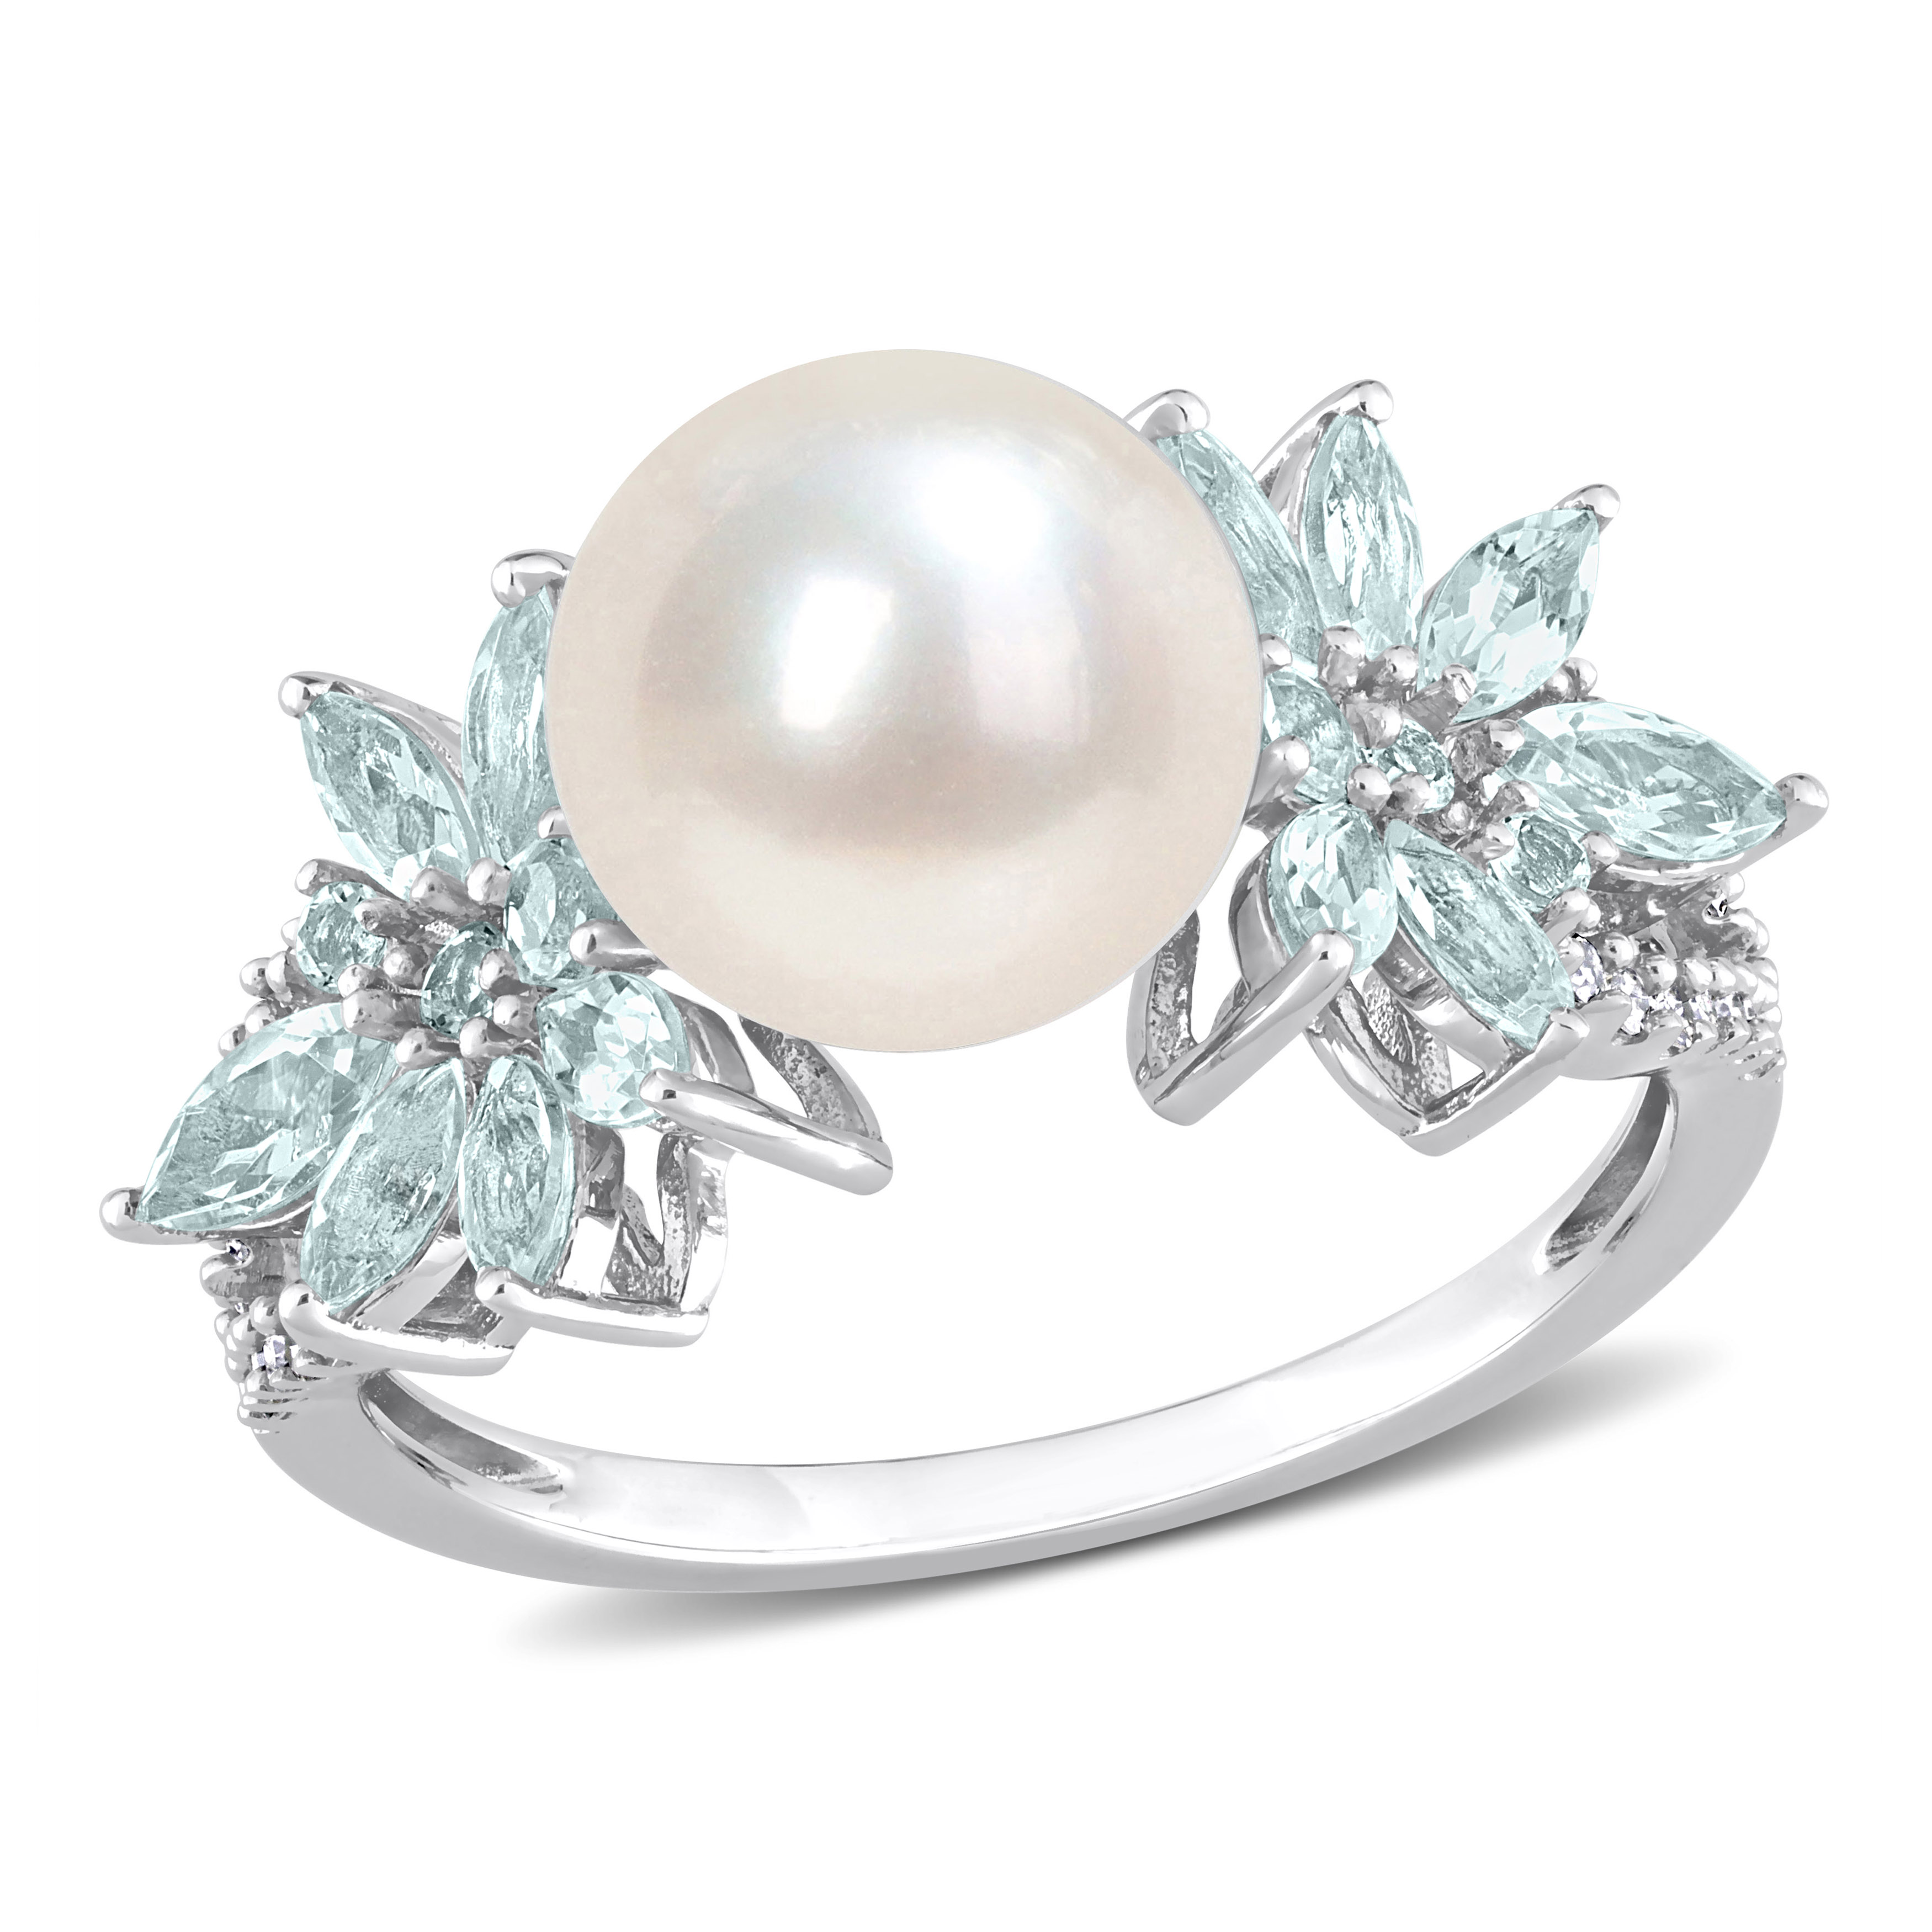 9-9.5MM Cultured Freshwater Pearl and 3/5 CT TGW Aquamarine and 1/8 CT TW Diamond Flower Ring in 14k White Gold